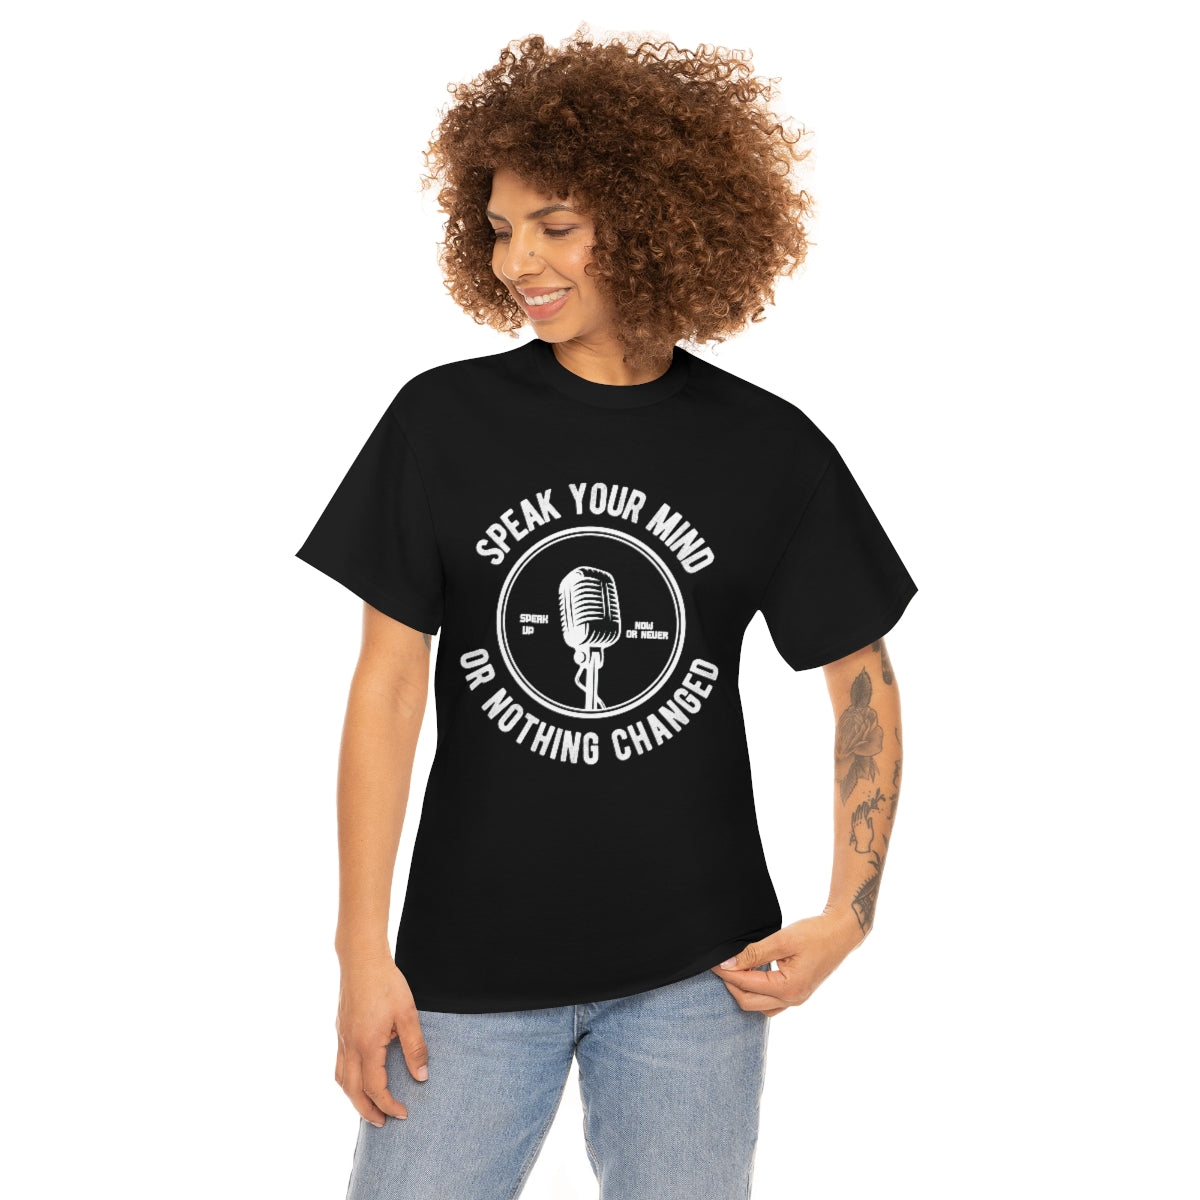 Speak your mind or nothing will change Heavy Cotton Tee